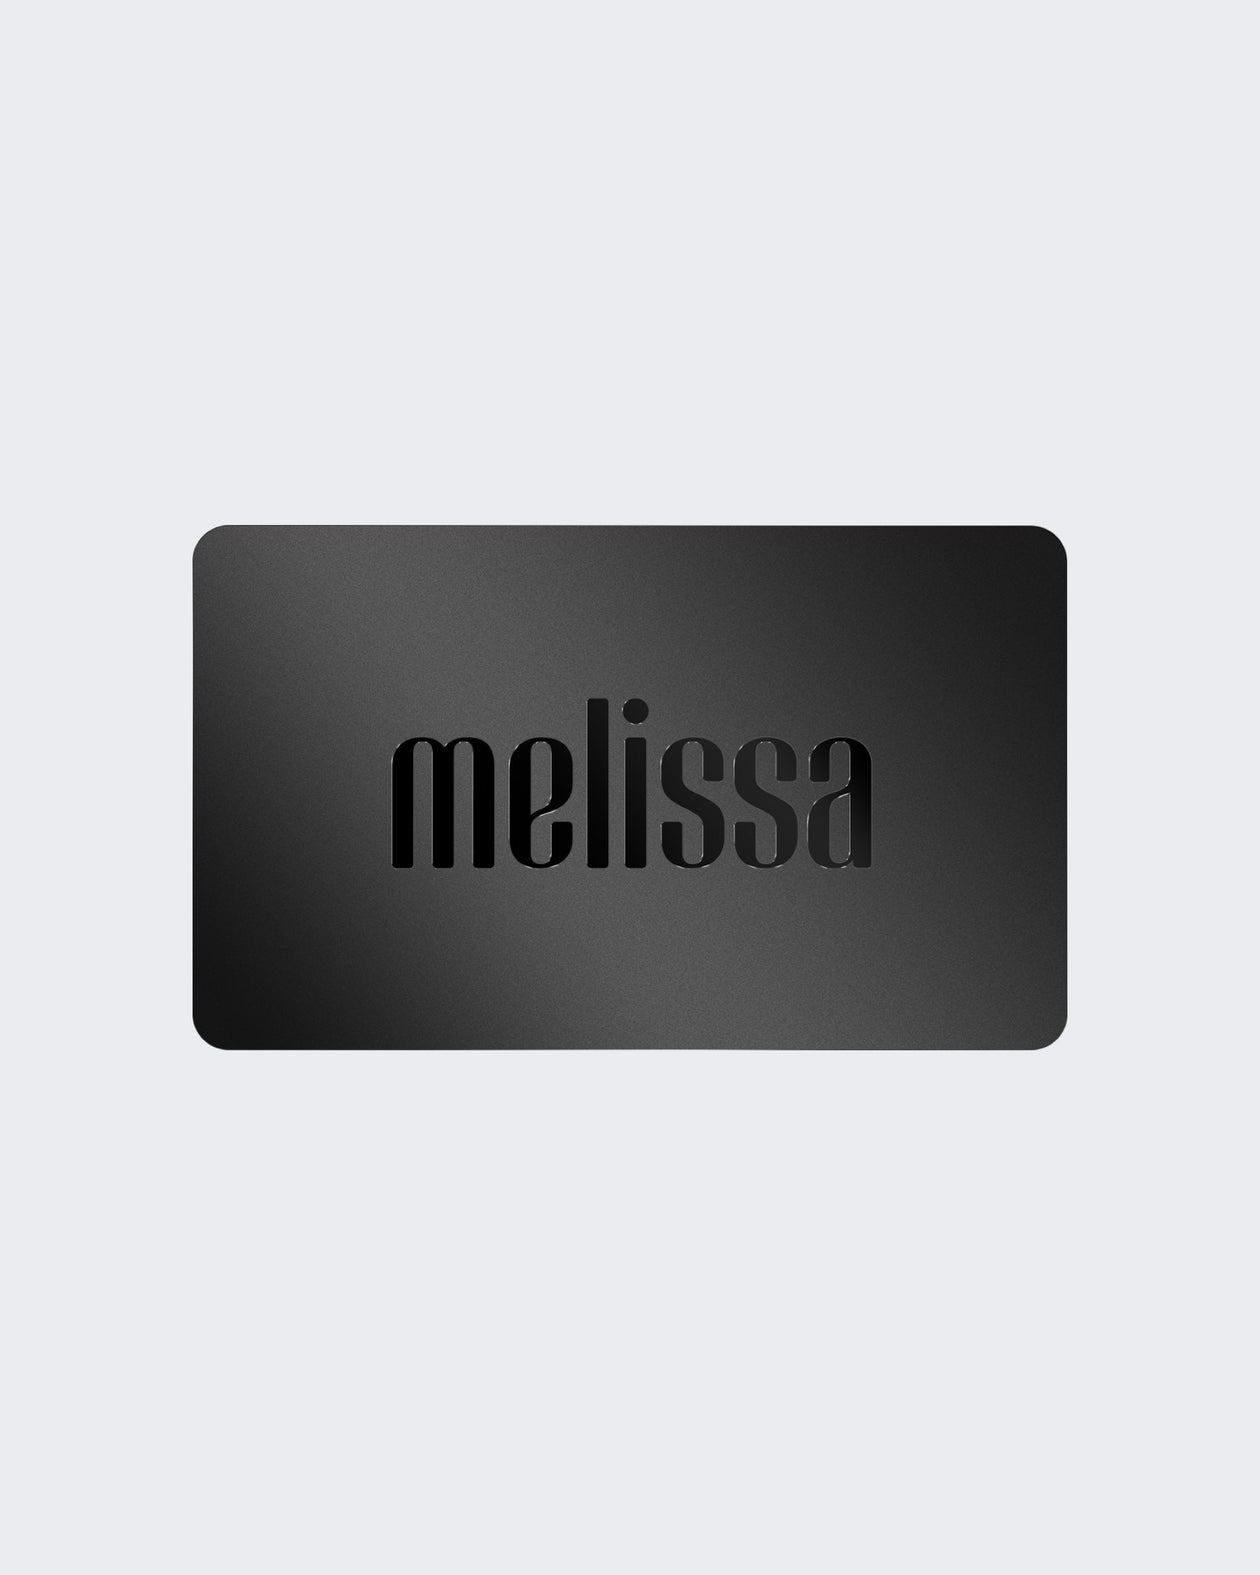 A black E-Gift Card with the Melissa logo printed on it.